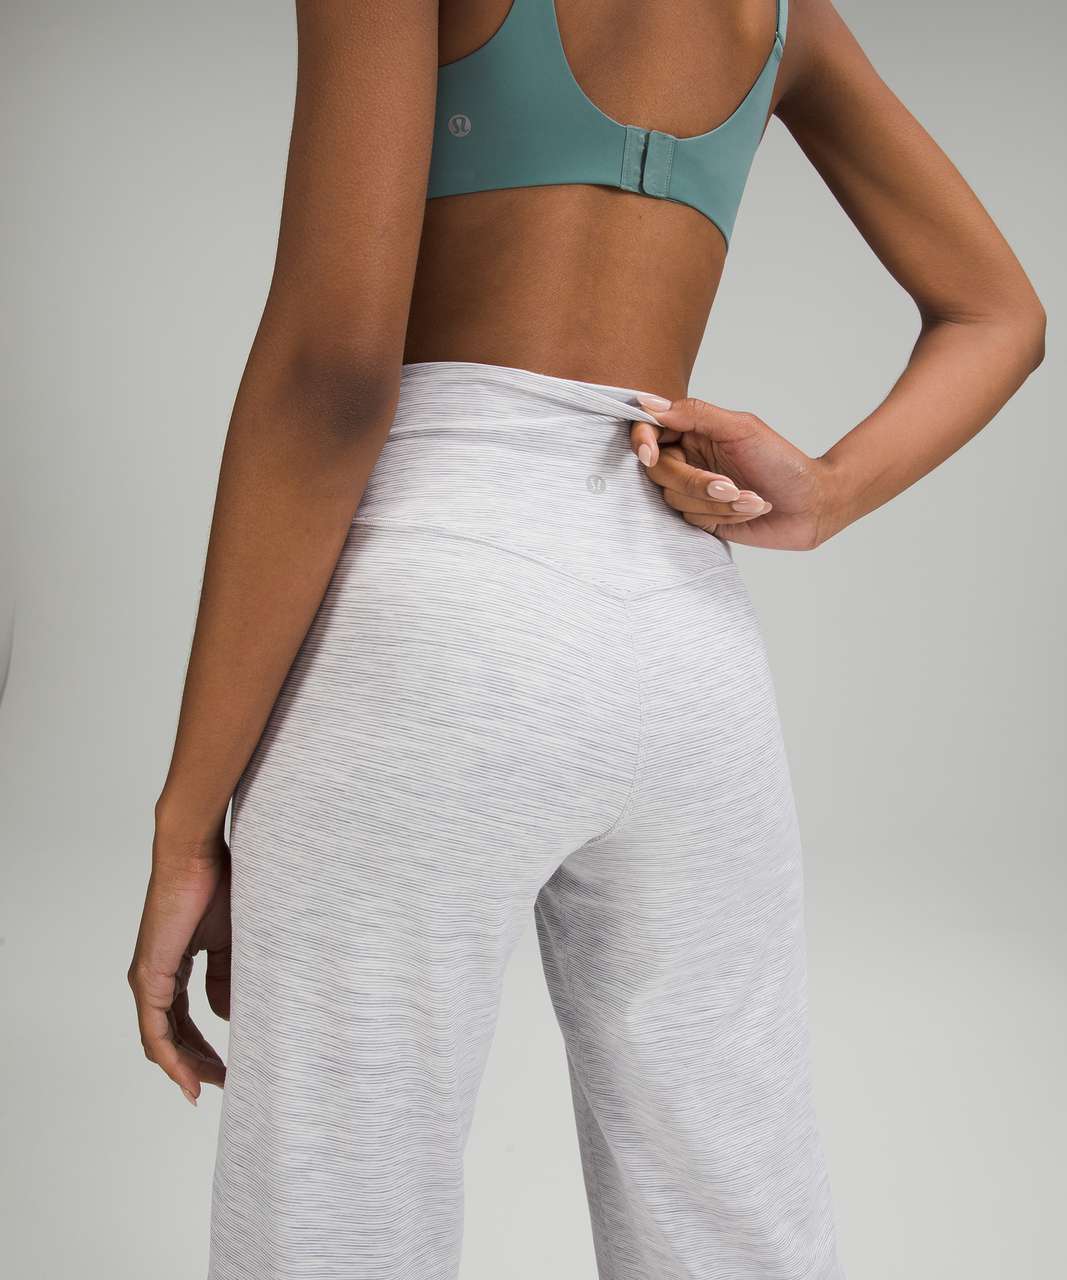 Lululemon Keep Moving Pant High-Rise - Wee Are From Space Nimbus